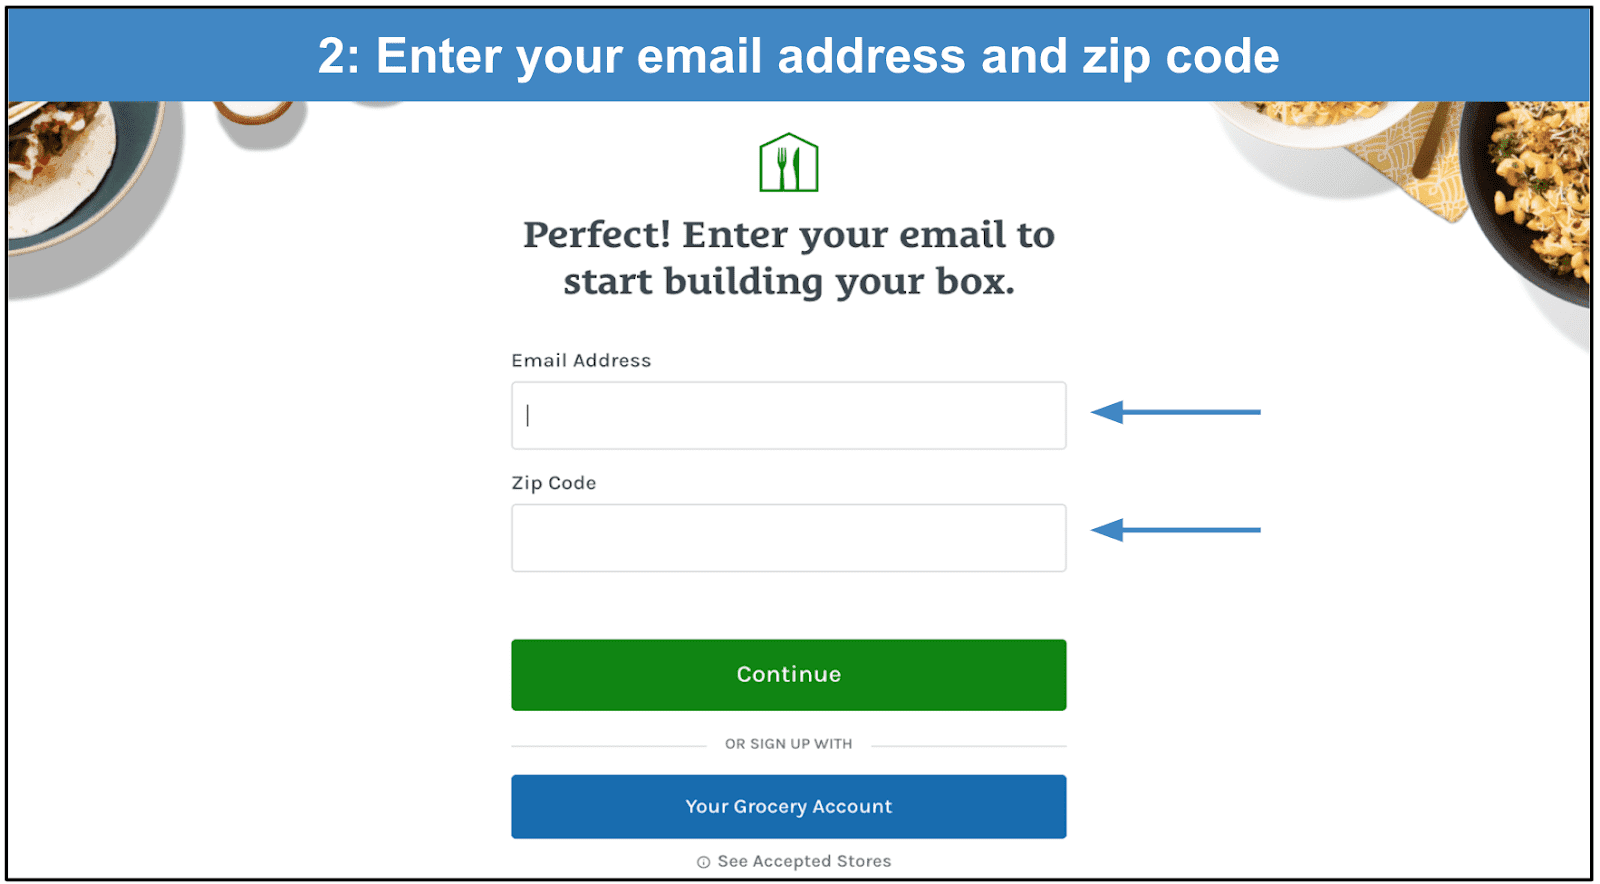  fill in your email address and zip code